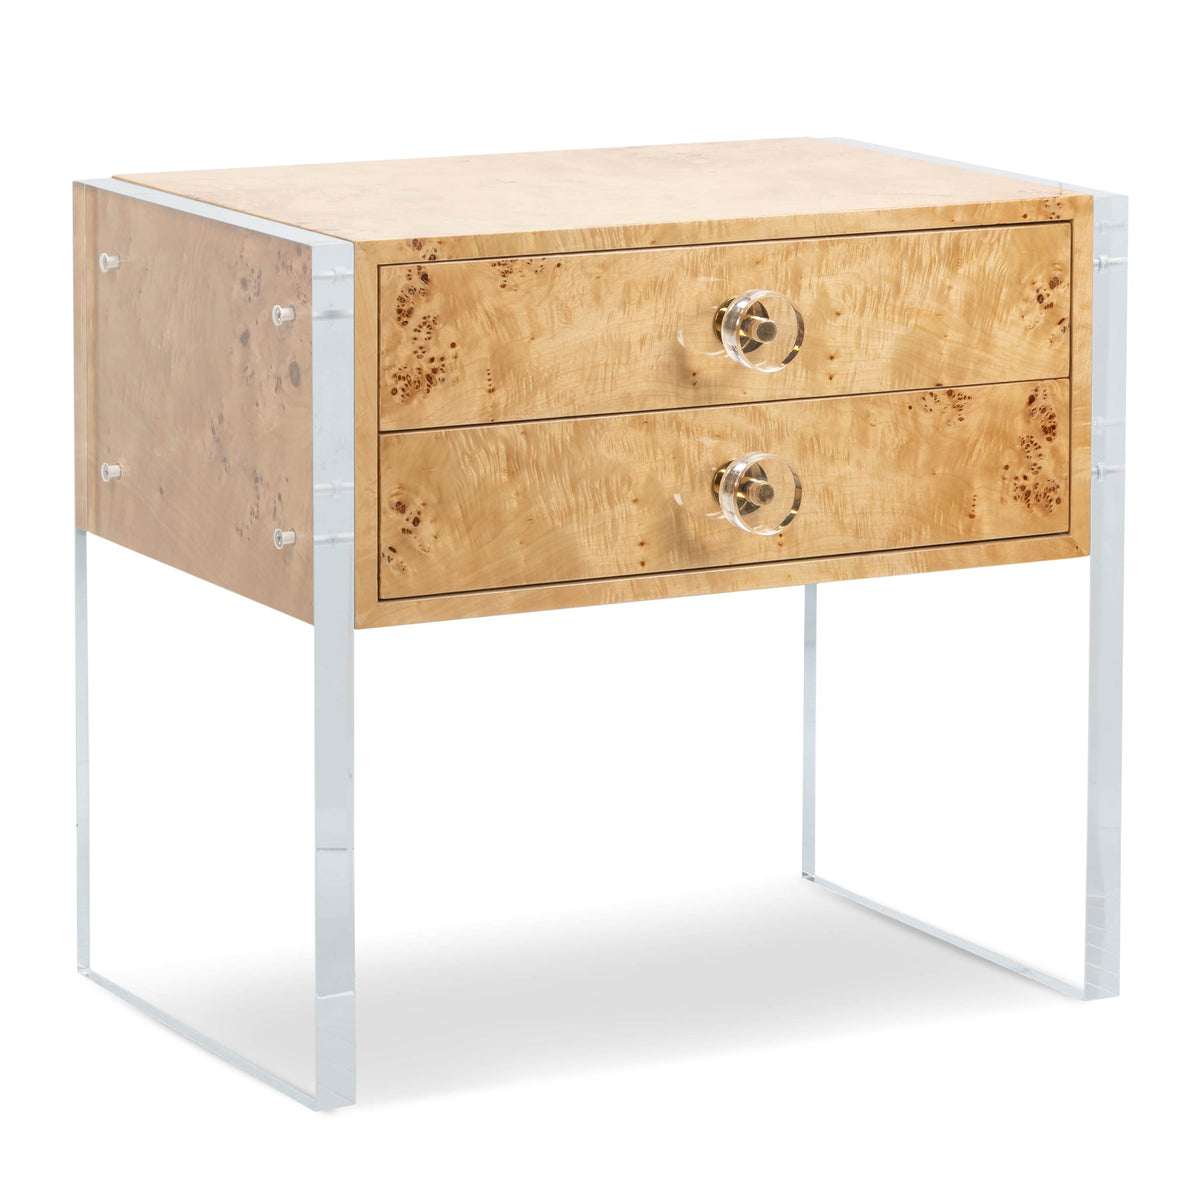 Goldfinger 2 Drawer Side Table in Burled Wood and Lucite Plinth Legs